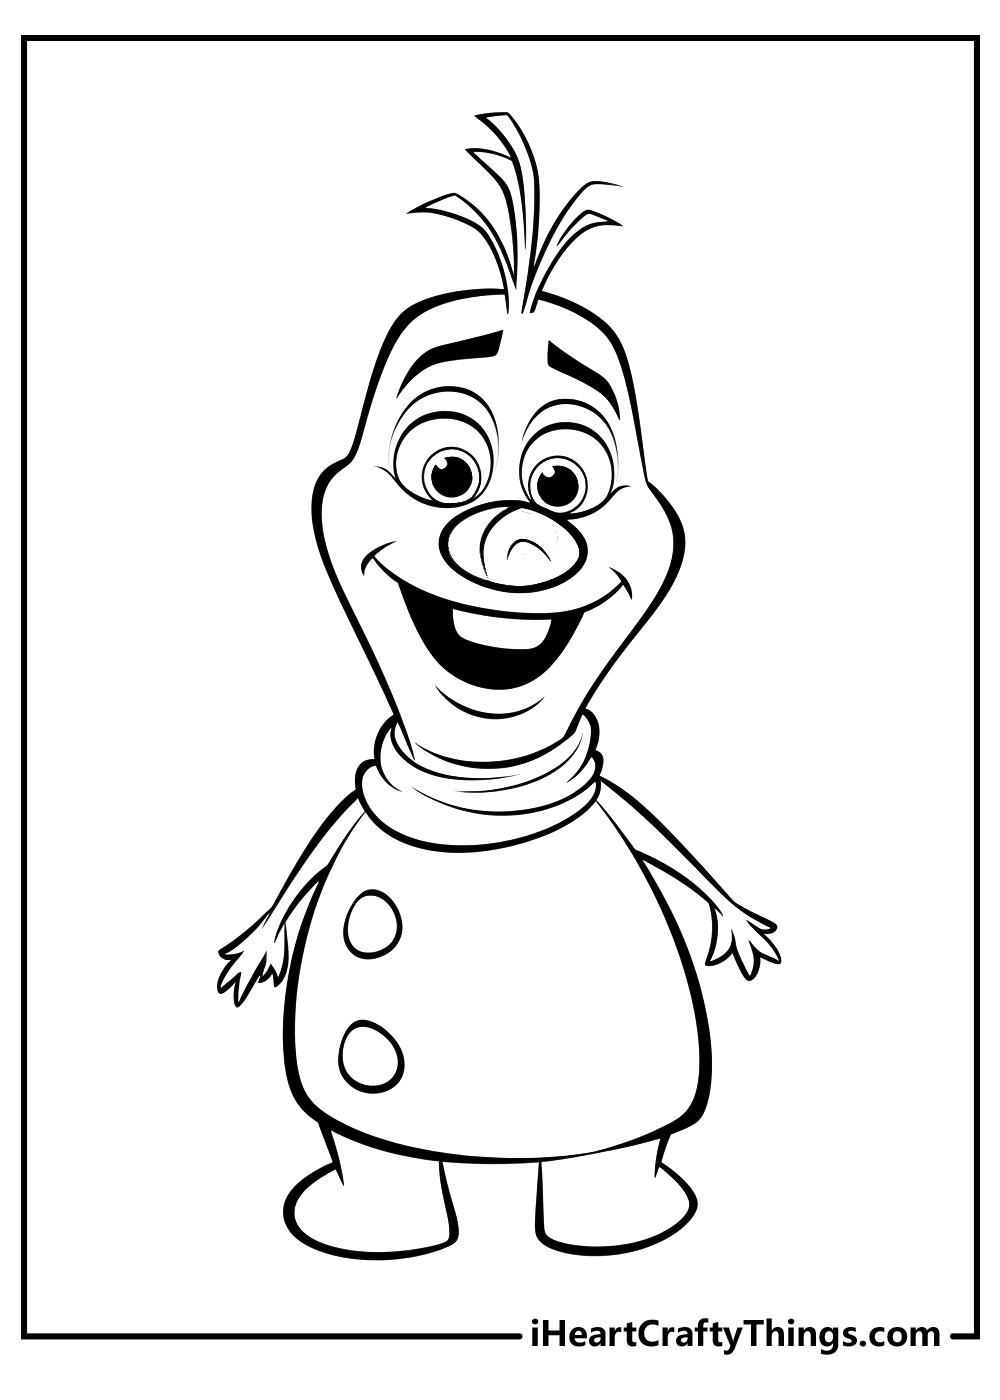 Olaf coloring pages free printables